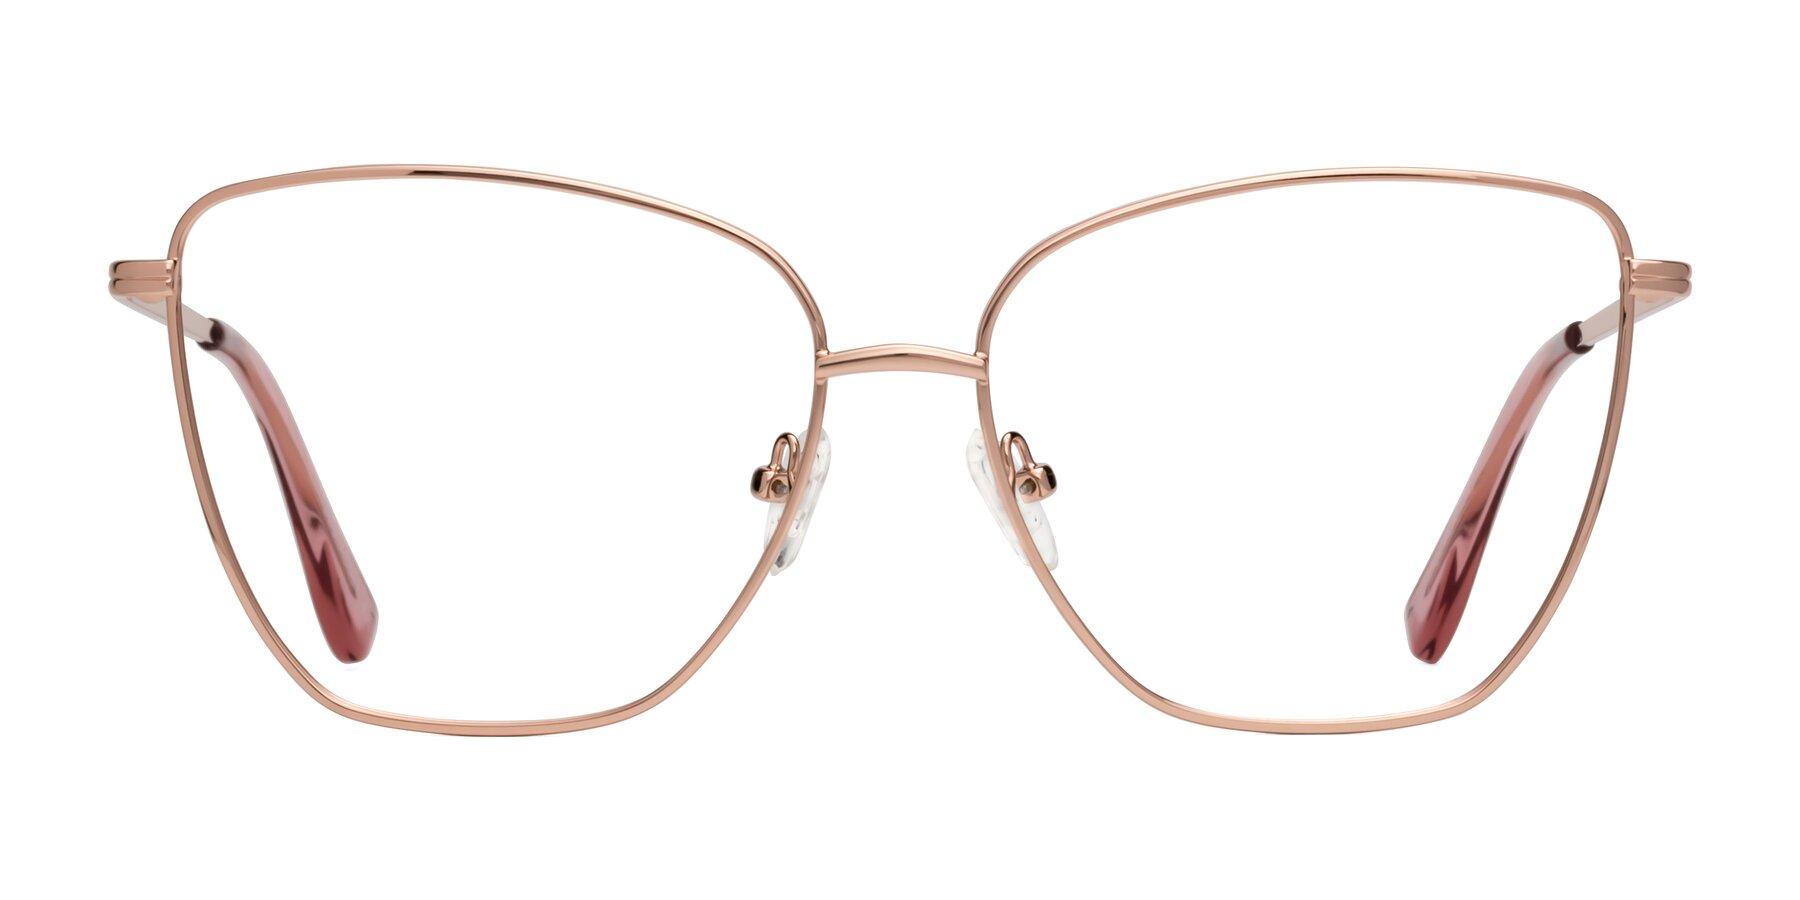 Oysters - Rose Gold Sunglasses Frame